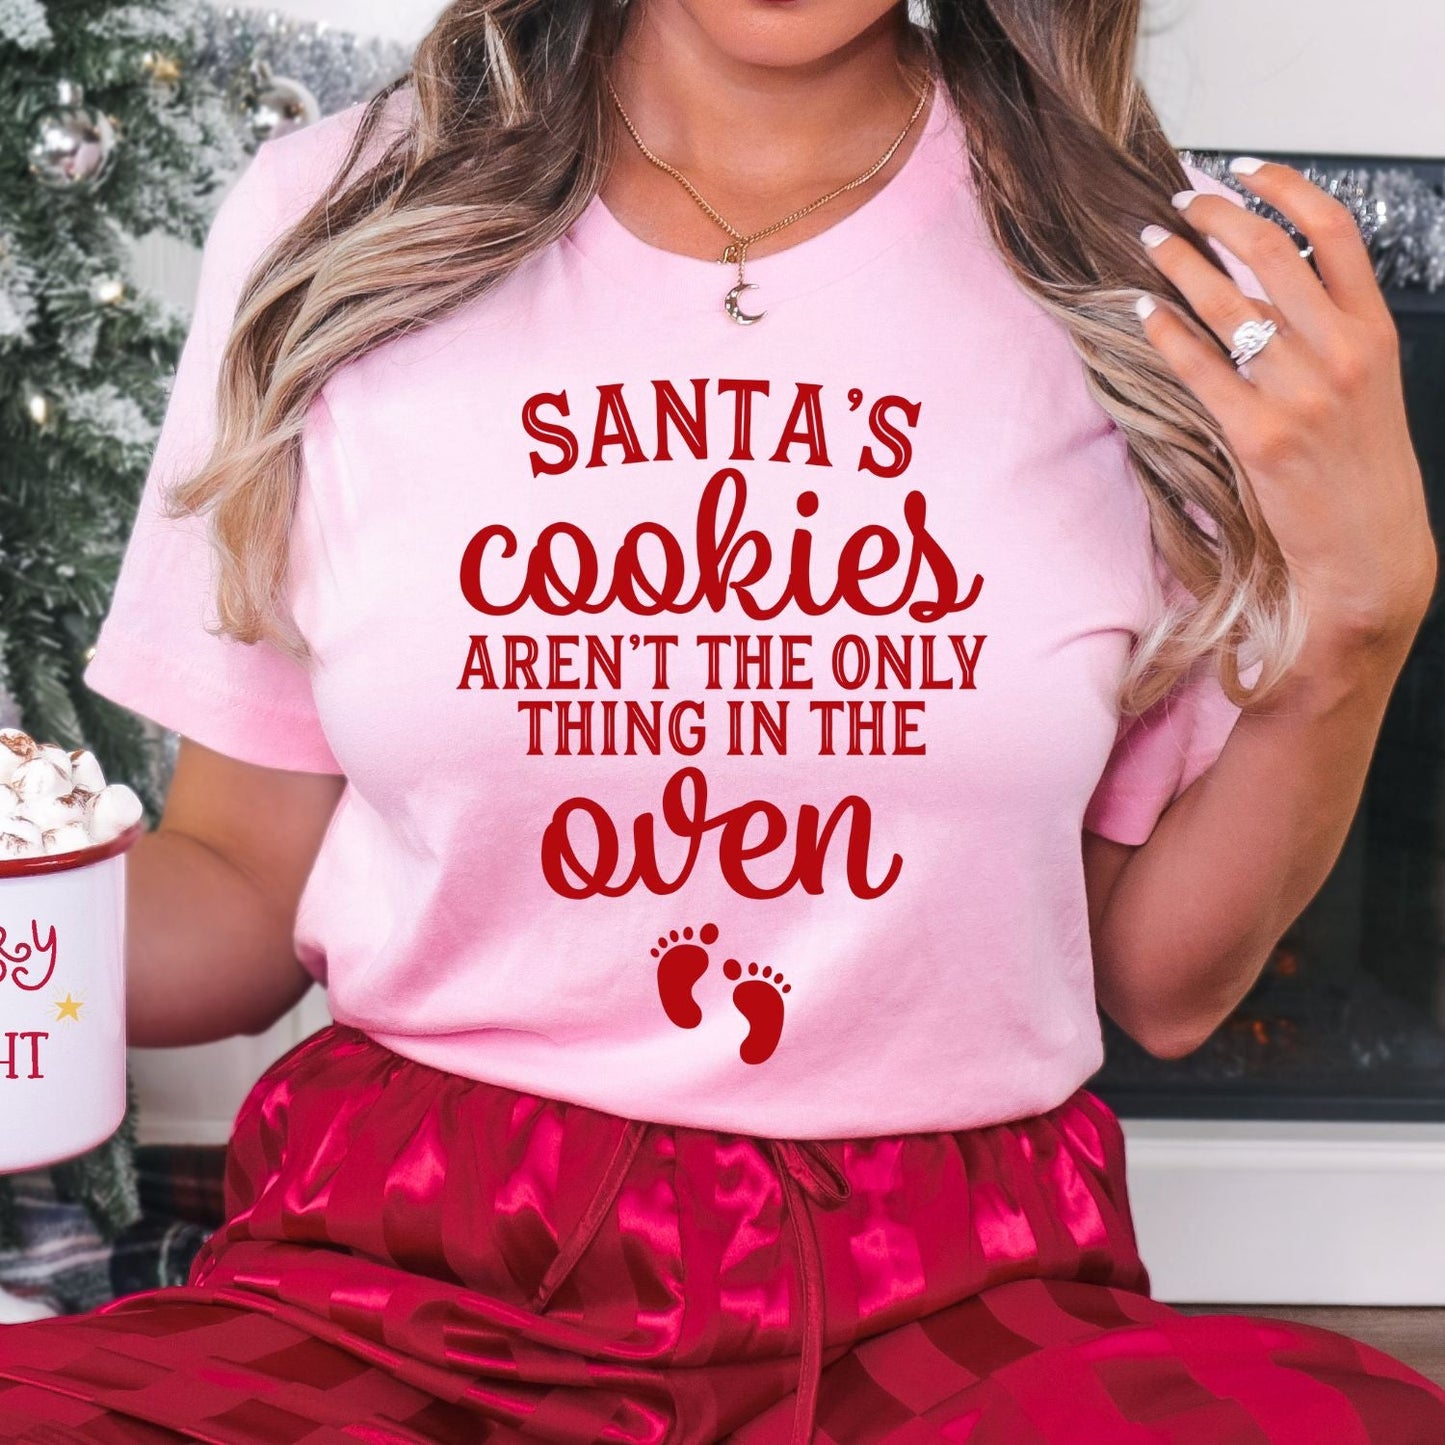 Santa's Cookies Aren't The Only Thing In The Oven